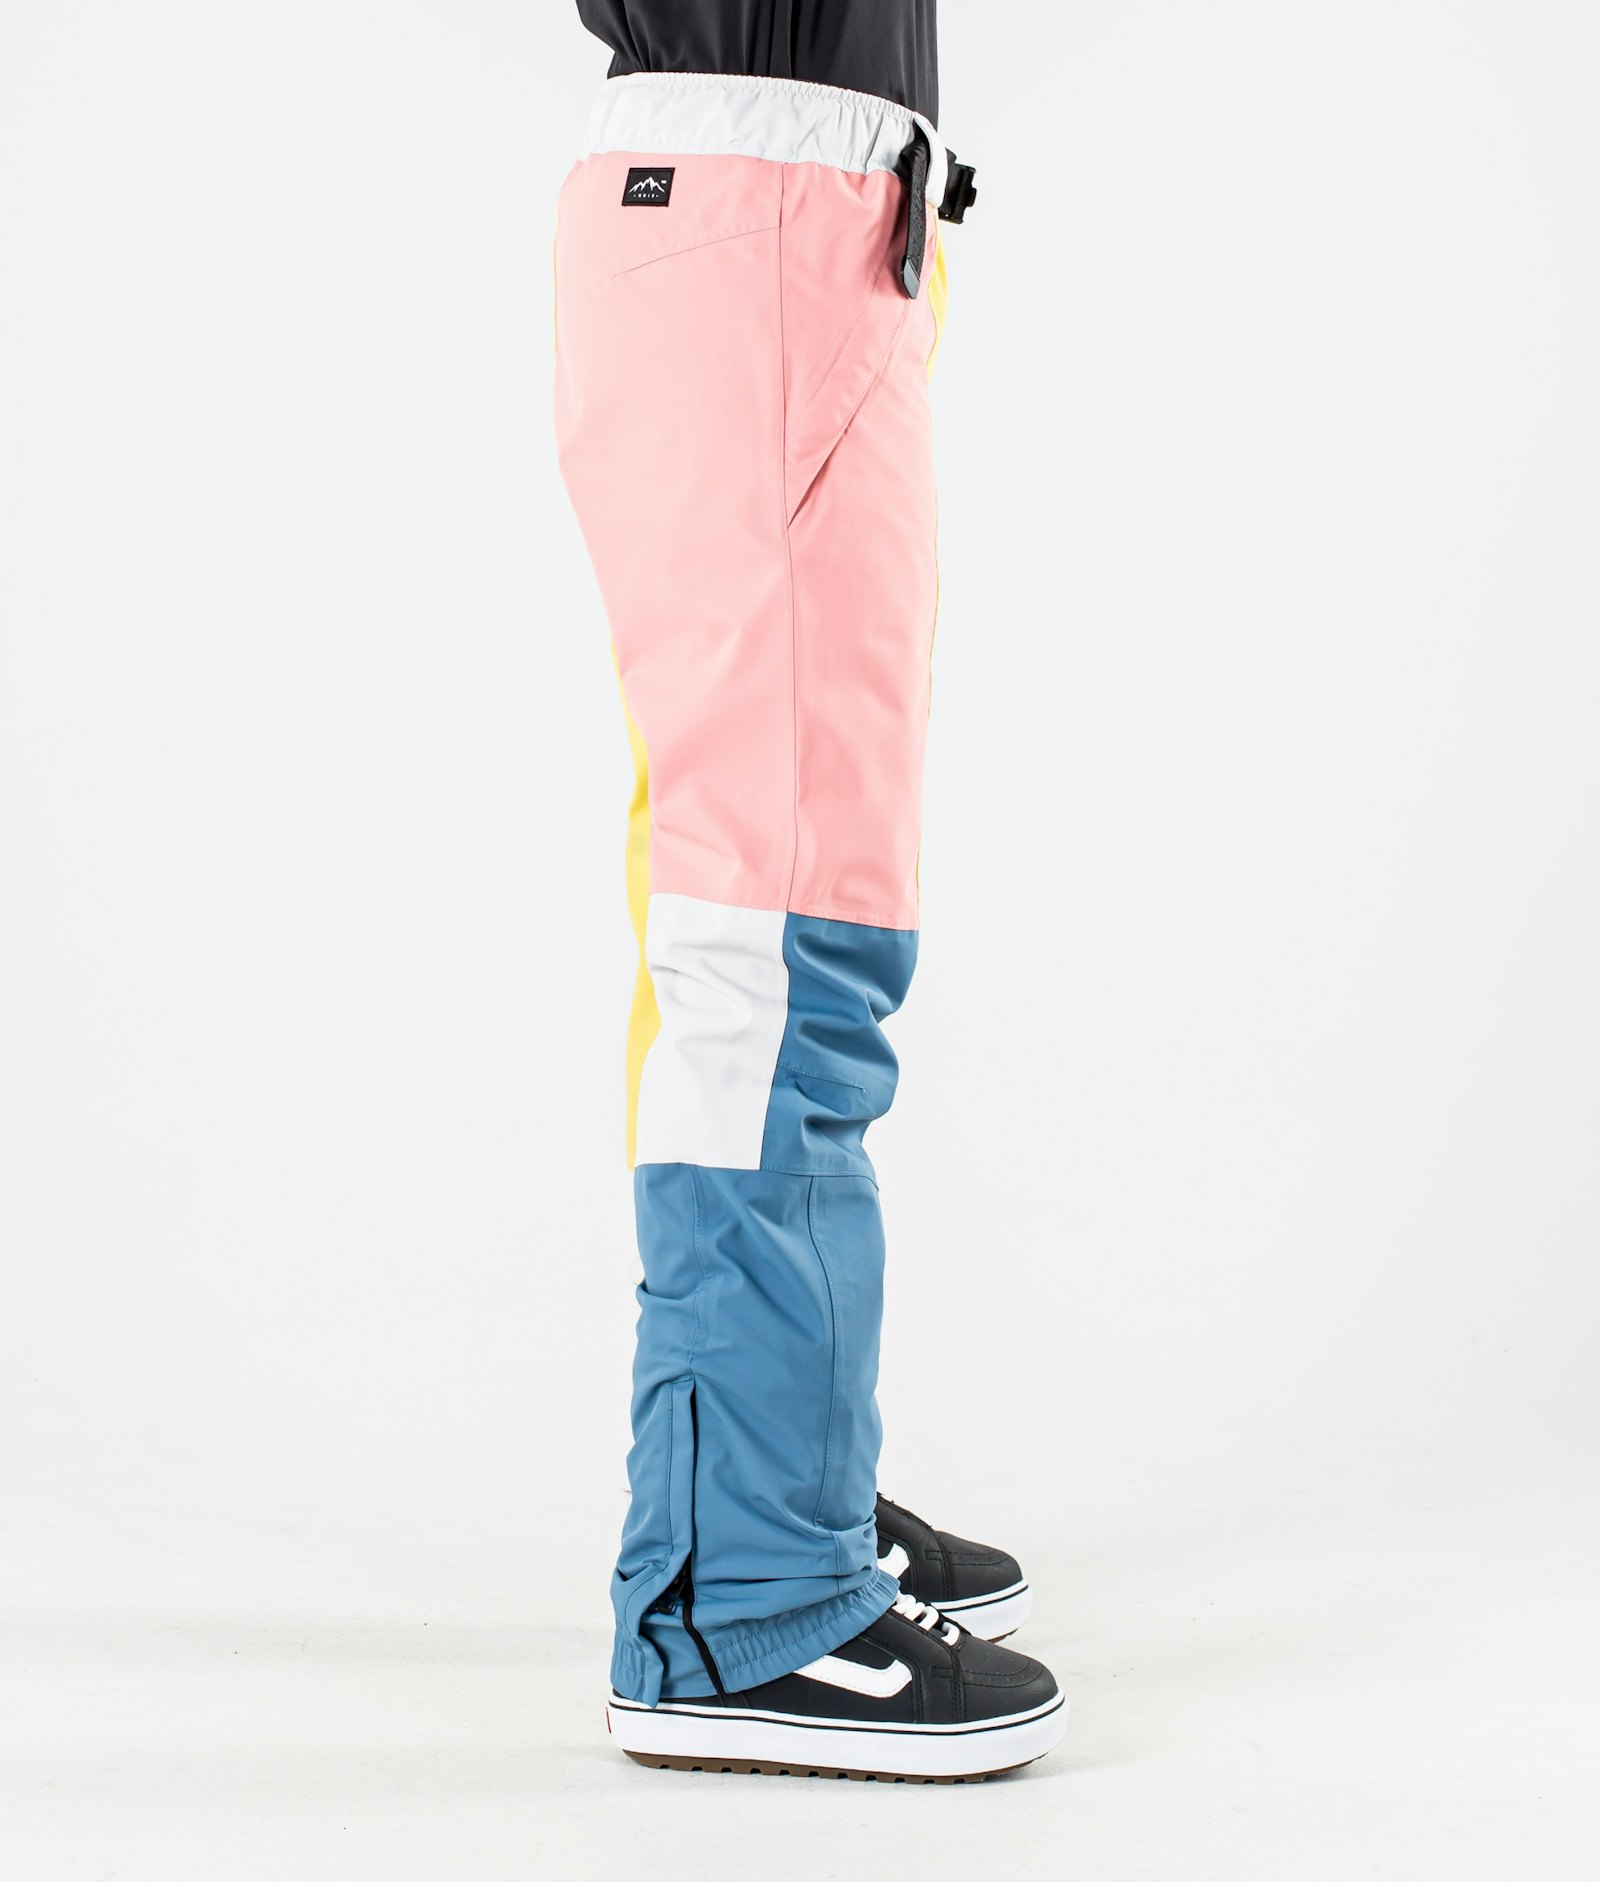 Dope Blizzard W 2020 Pantalones Snowboard Mujer Limited Edition Pink Patchwork